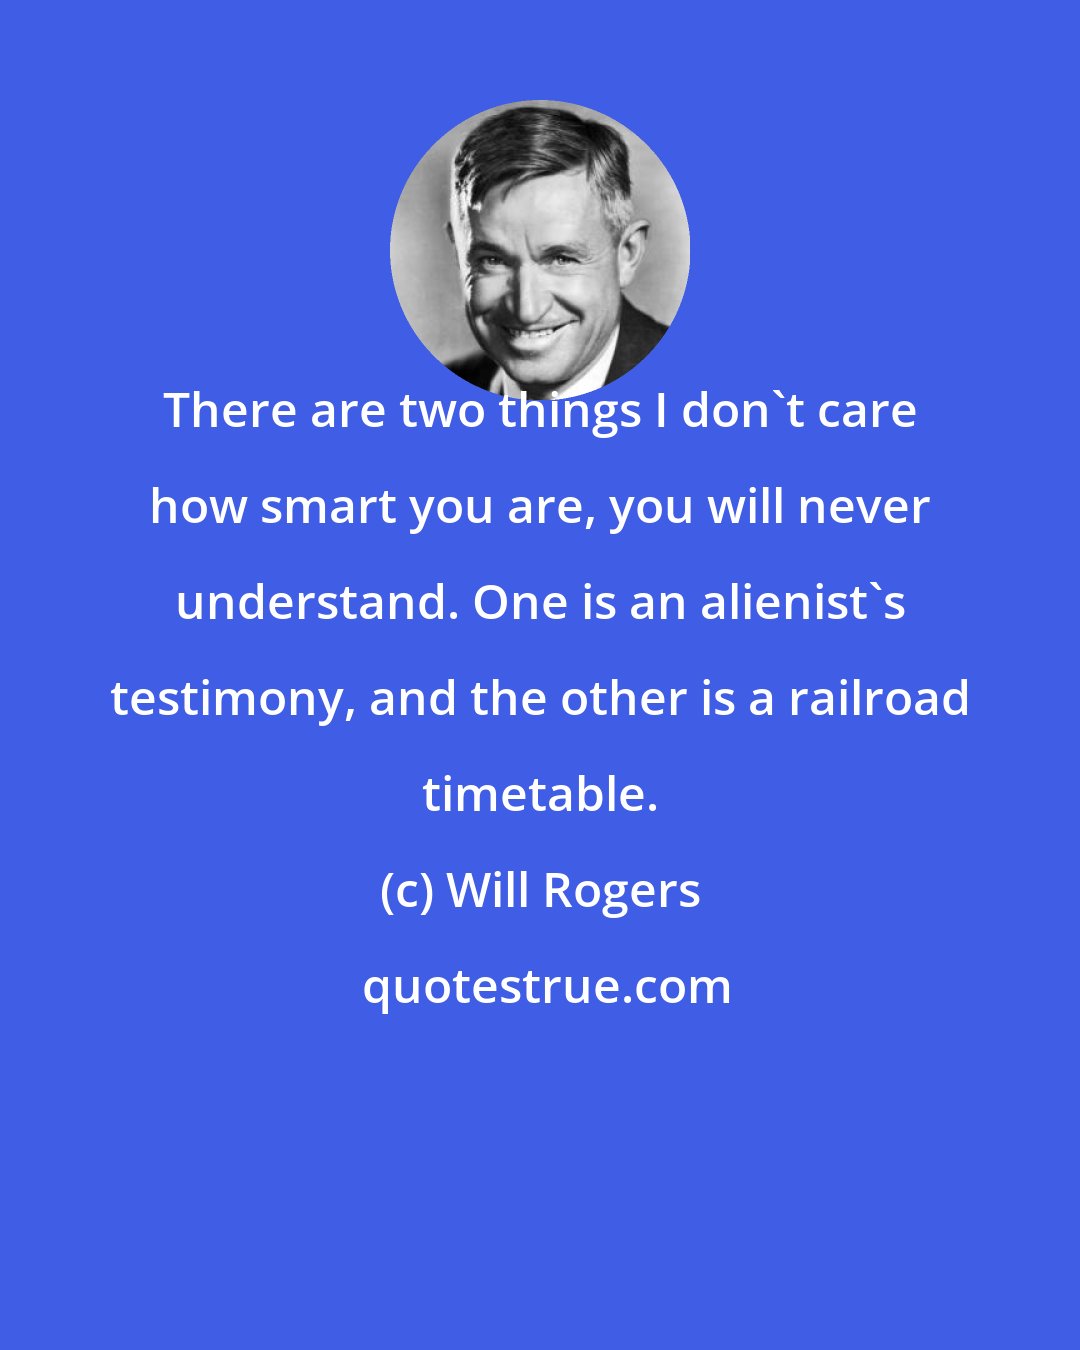 Will Rogers: There are two things I don't care how smart you are, you will never understand. One is an alienist's testimony, and the other is a railroad timetable.